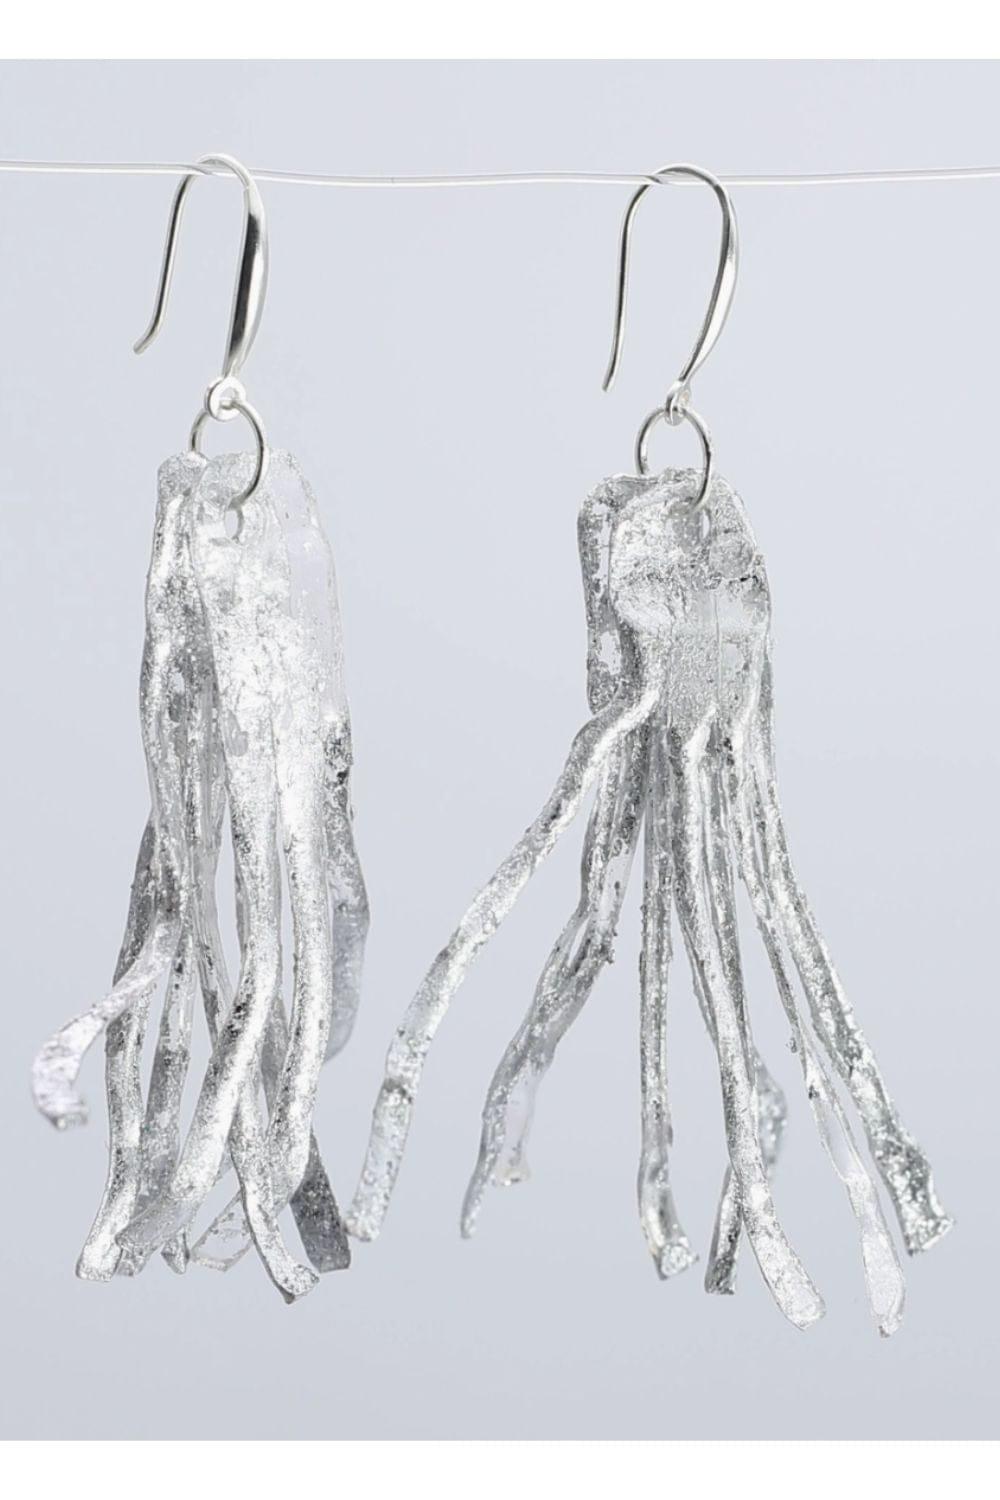 Silver Gilded earrings with sterling silver hooks. They look very light and airy.